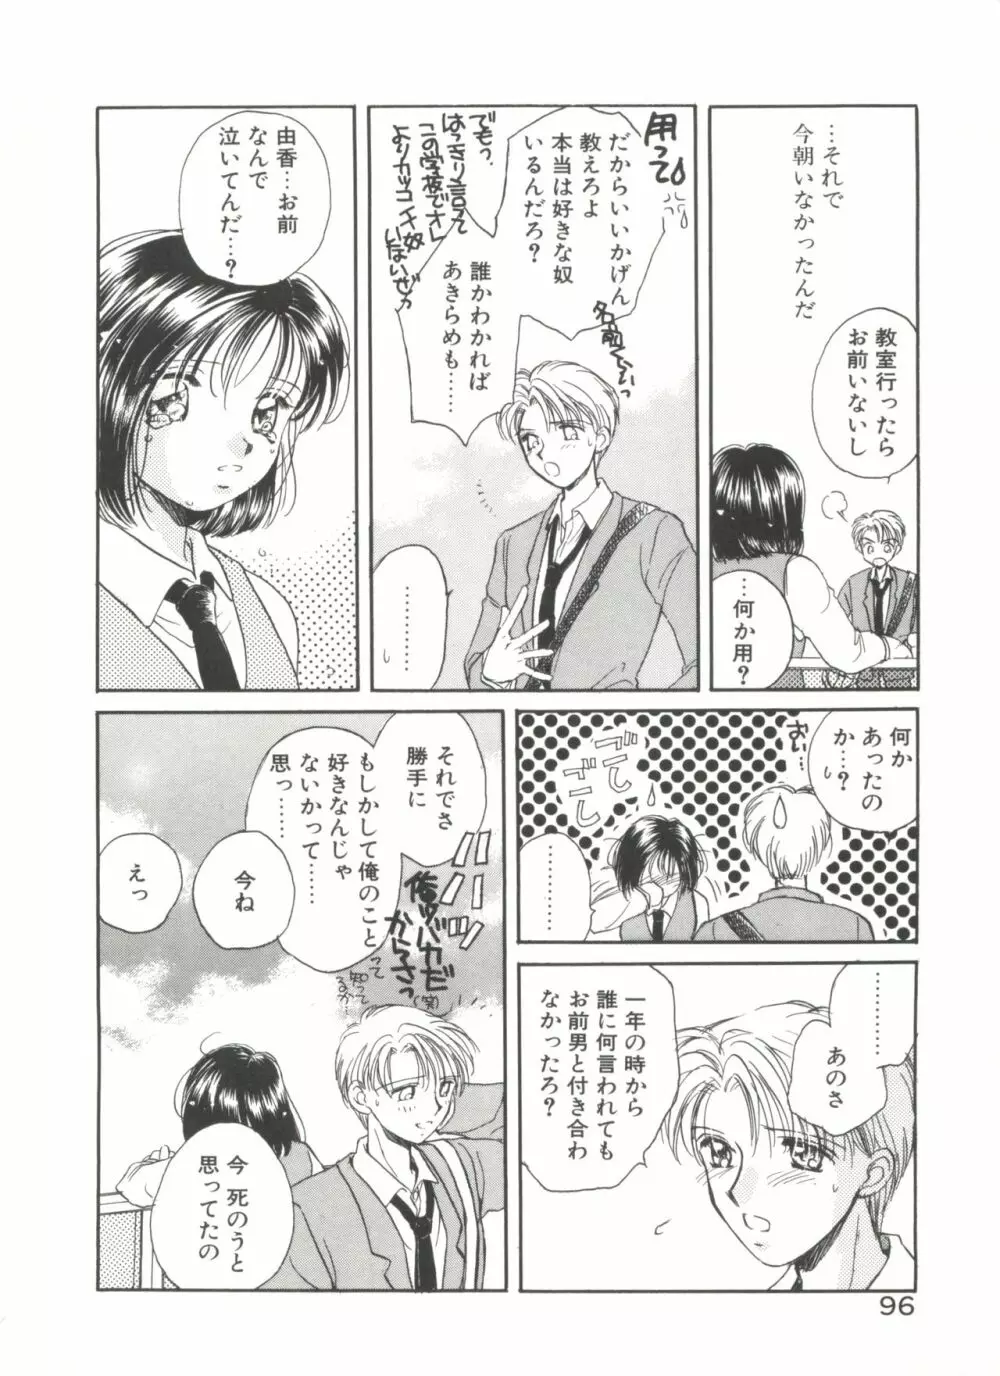 STUDY AFTER SCHOOL Page.90